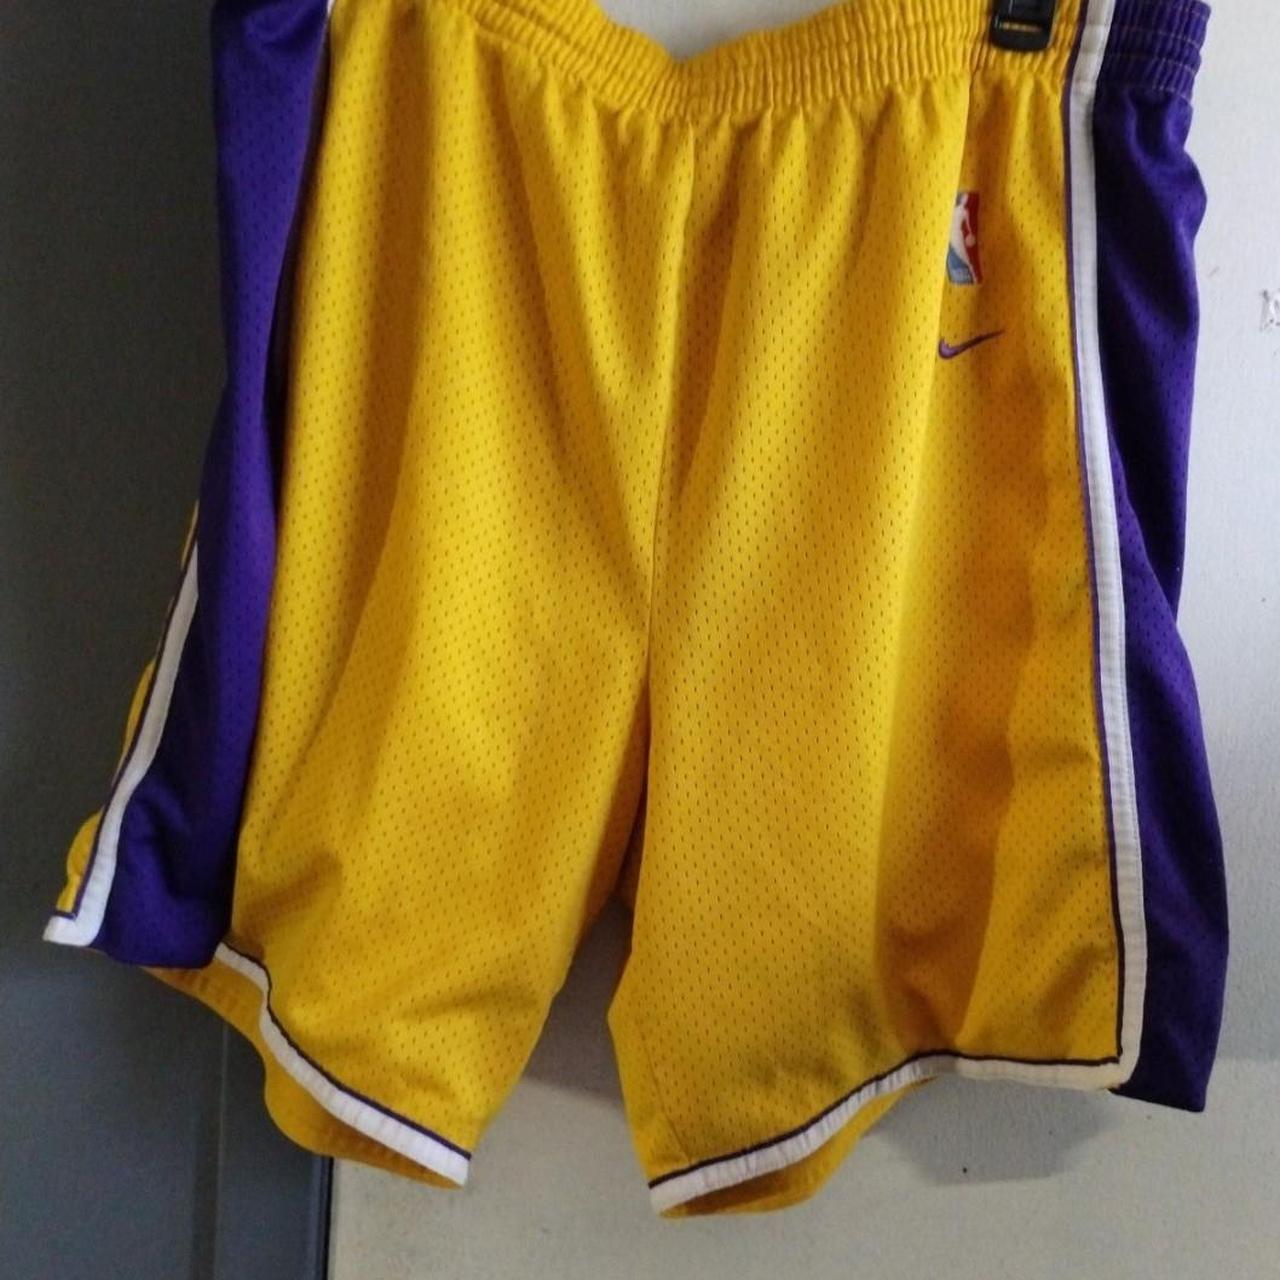 Nike Team Lakers NBA Shorts , Message me with any